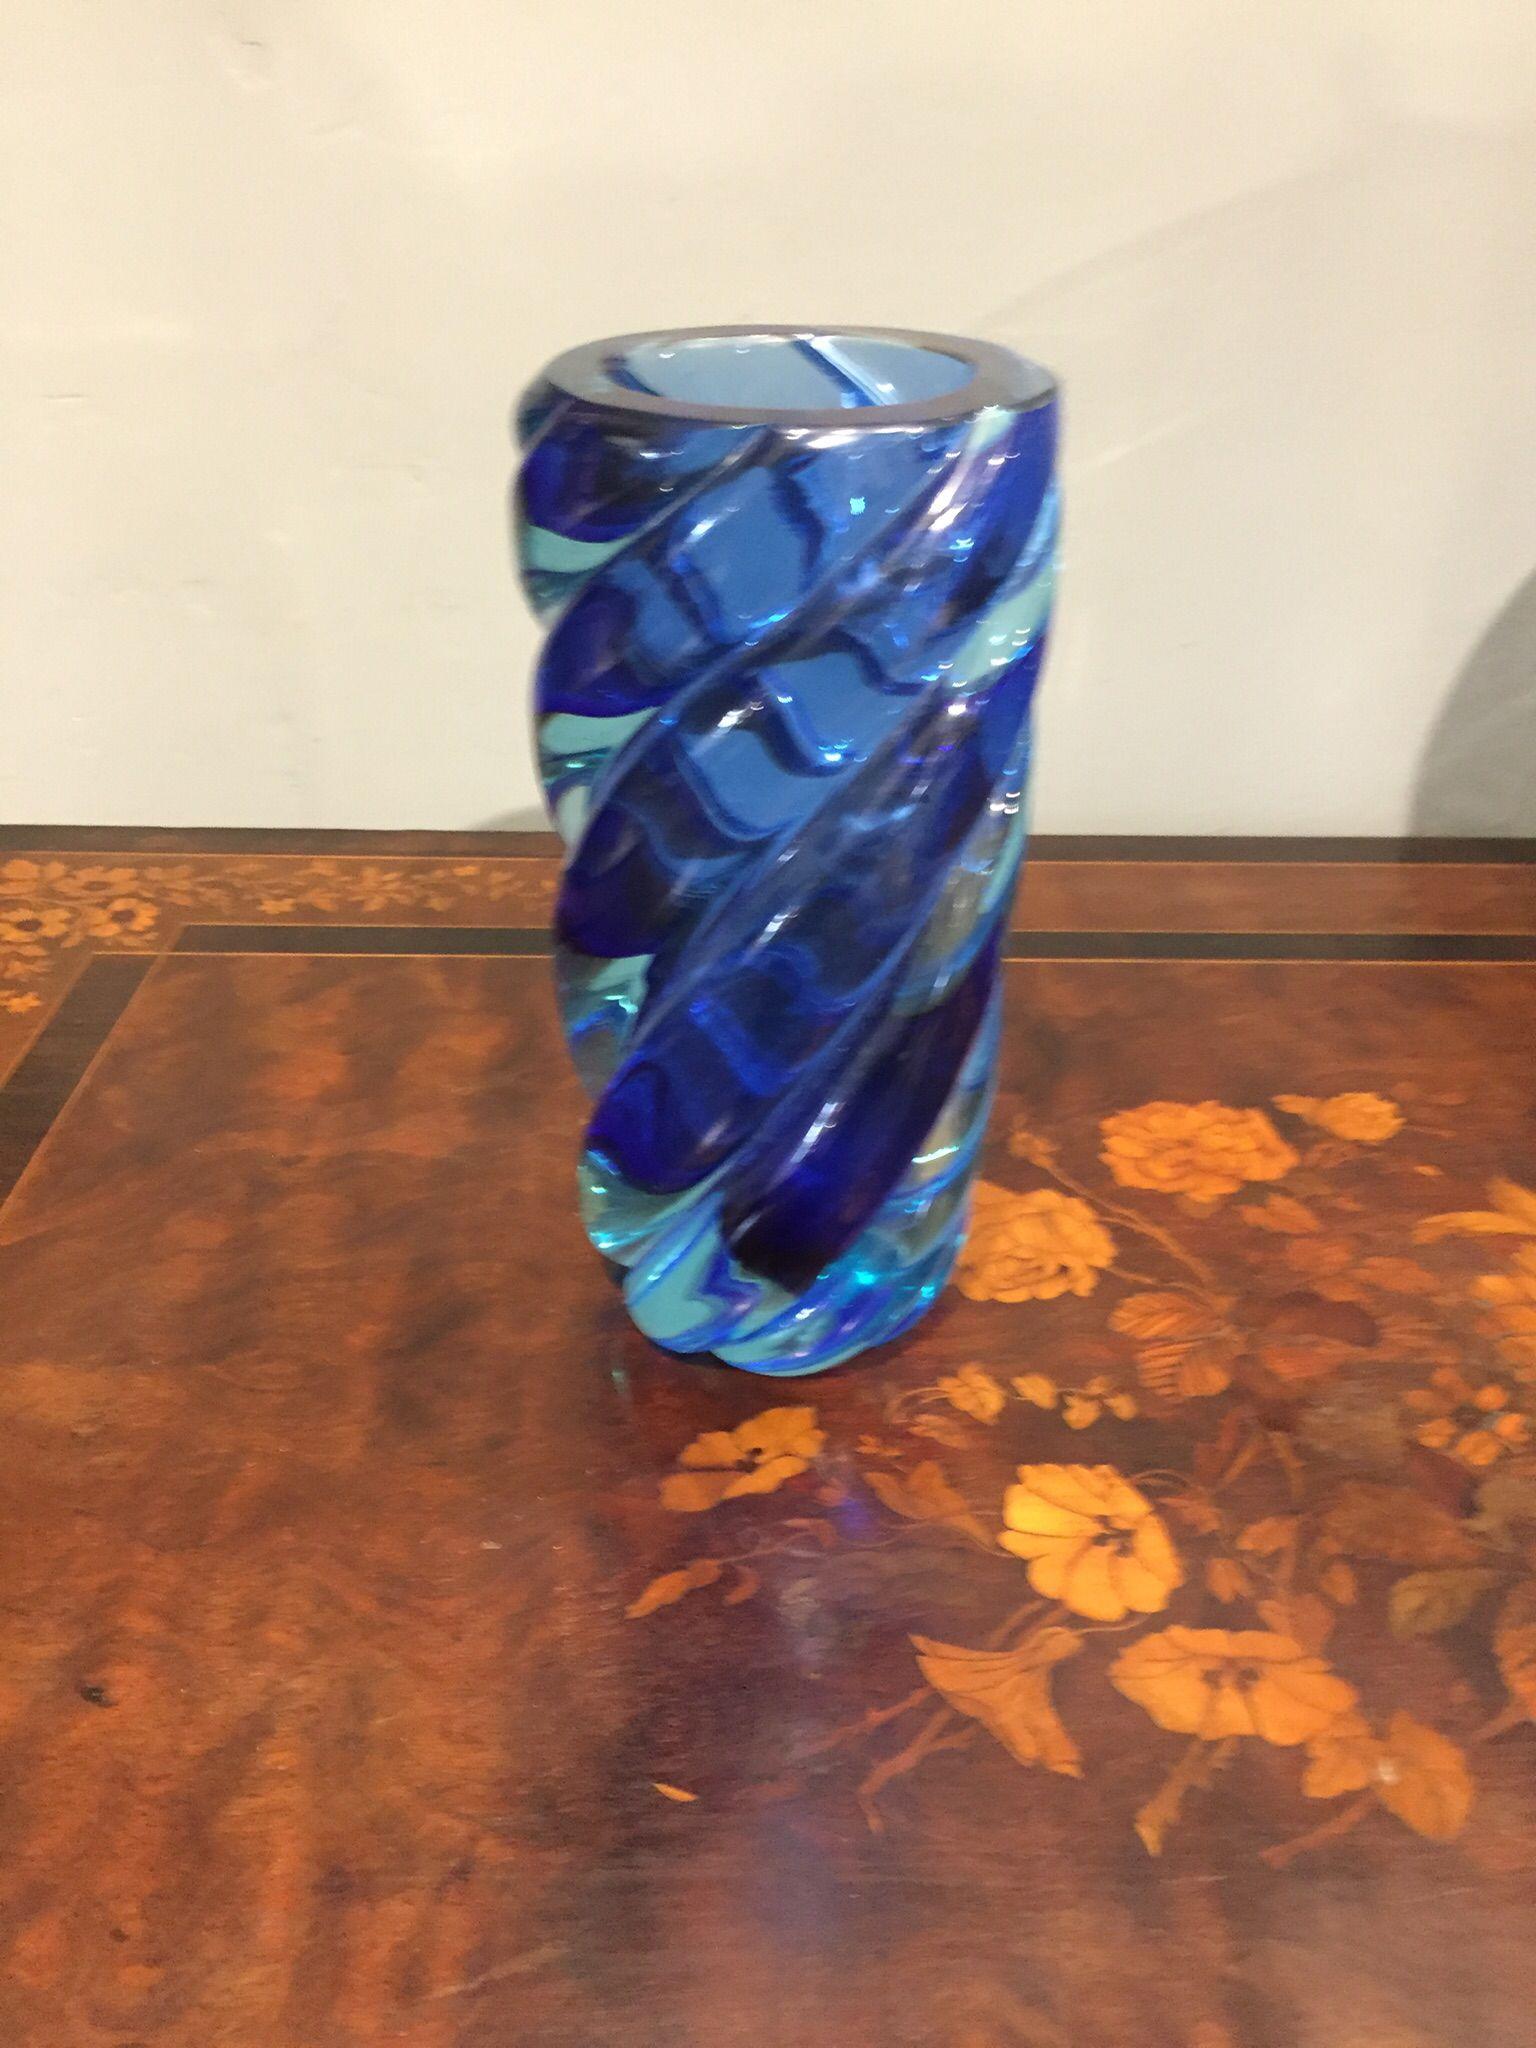 Mid Century Modern, Sommerso Murano Blue Vase, Doppio Ritorto Amazing Technique. 
The submerged glass technique is quite complicated, before blowing the glass is heated again to obtain the right softness. Twisted is when the straight design is